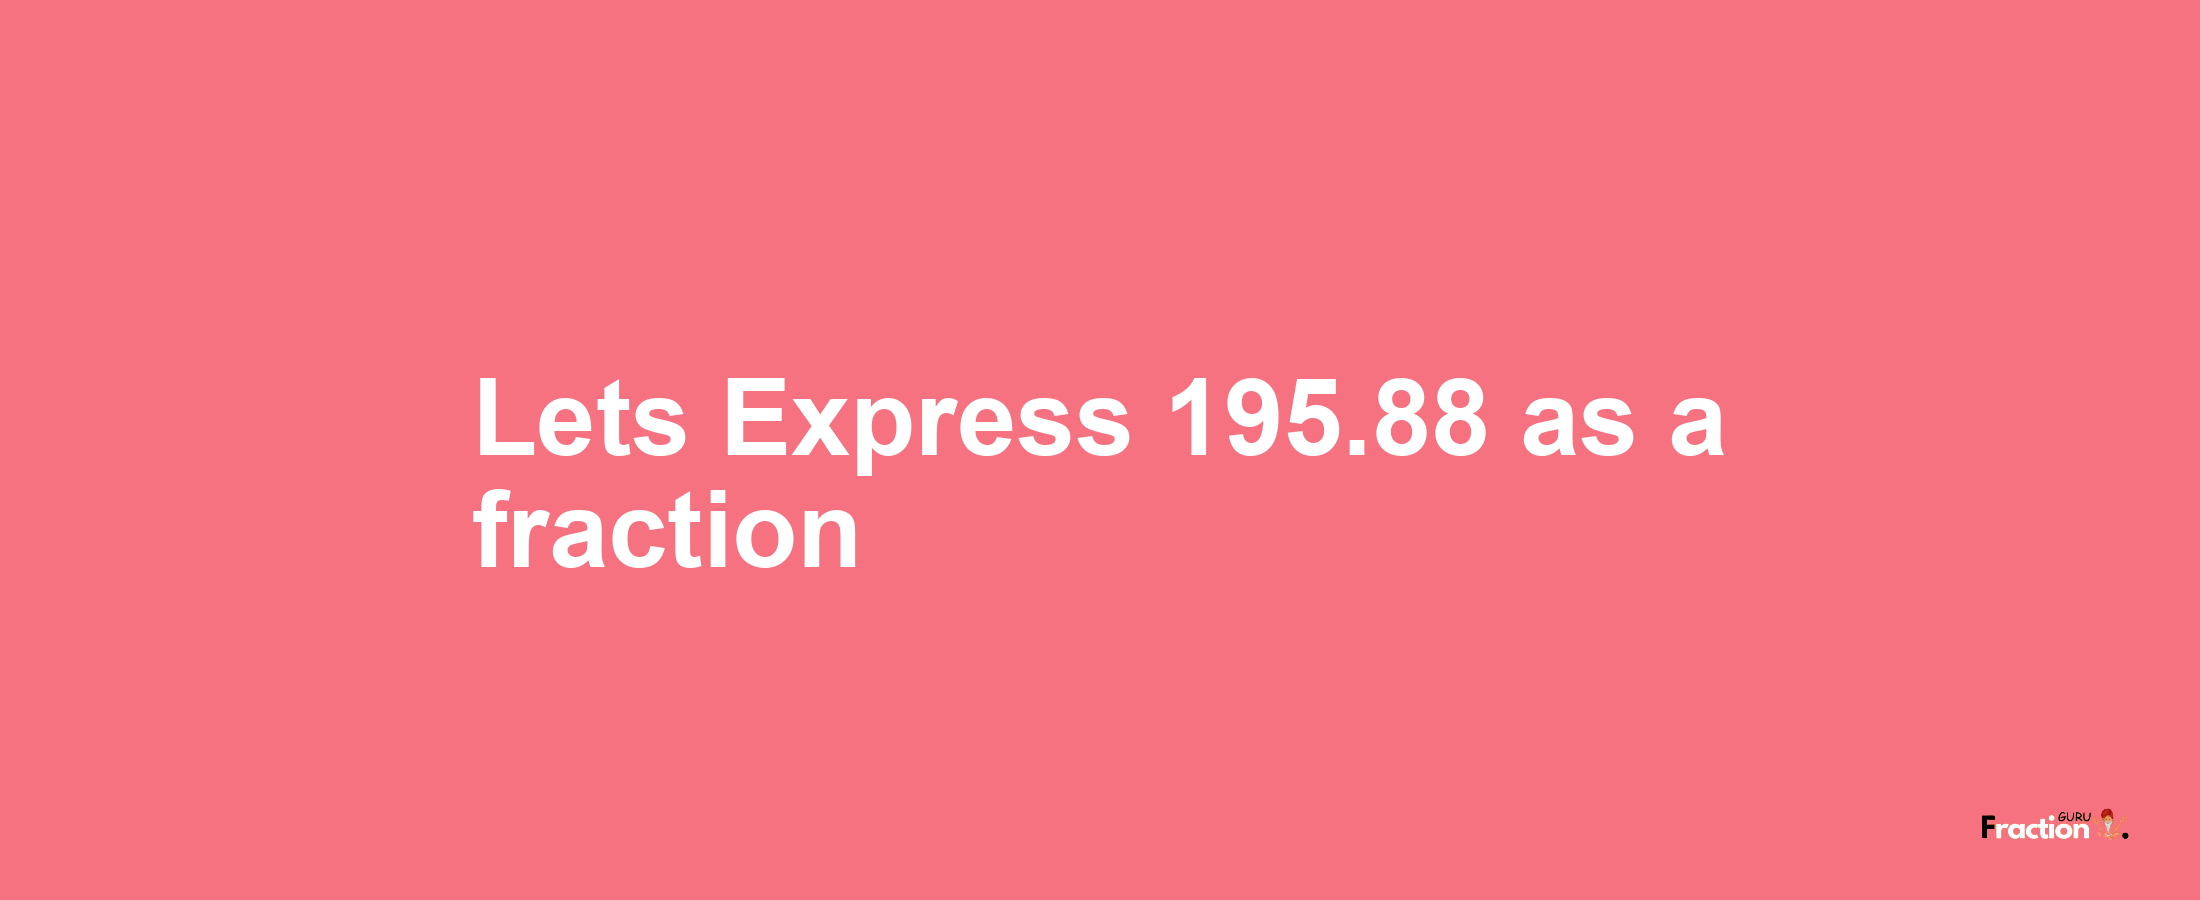 Lets Express 195.88 as afraction